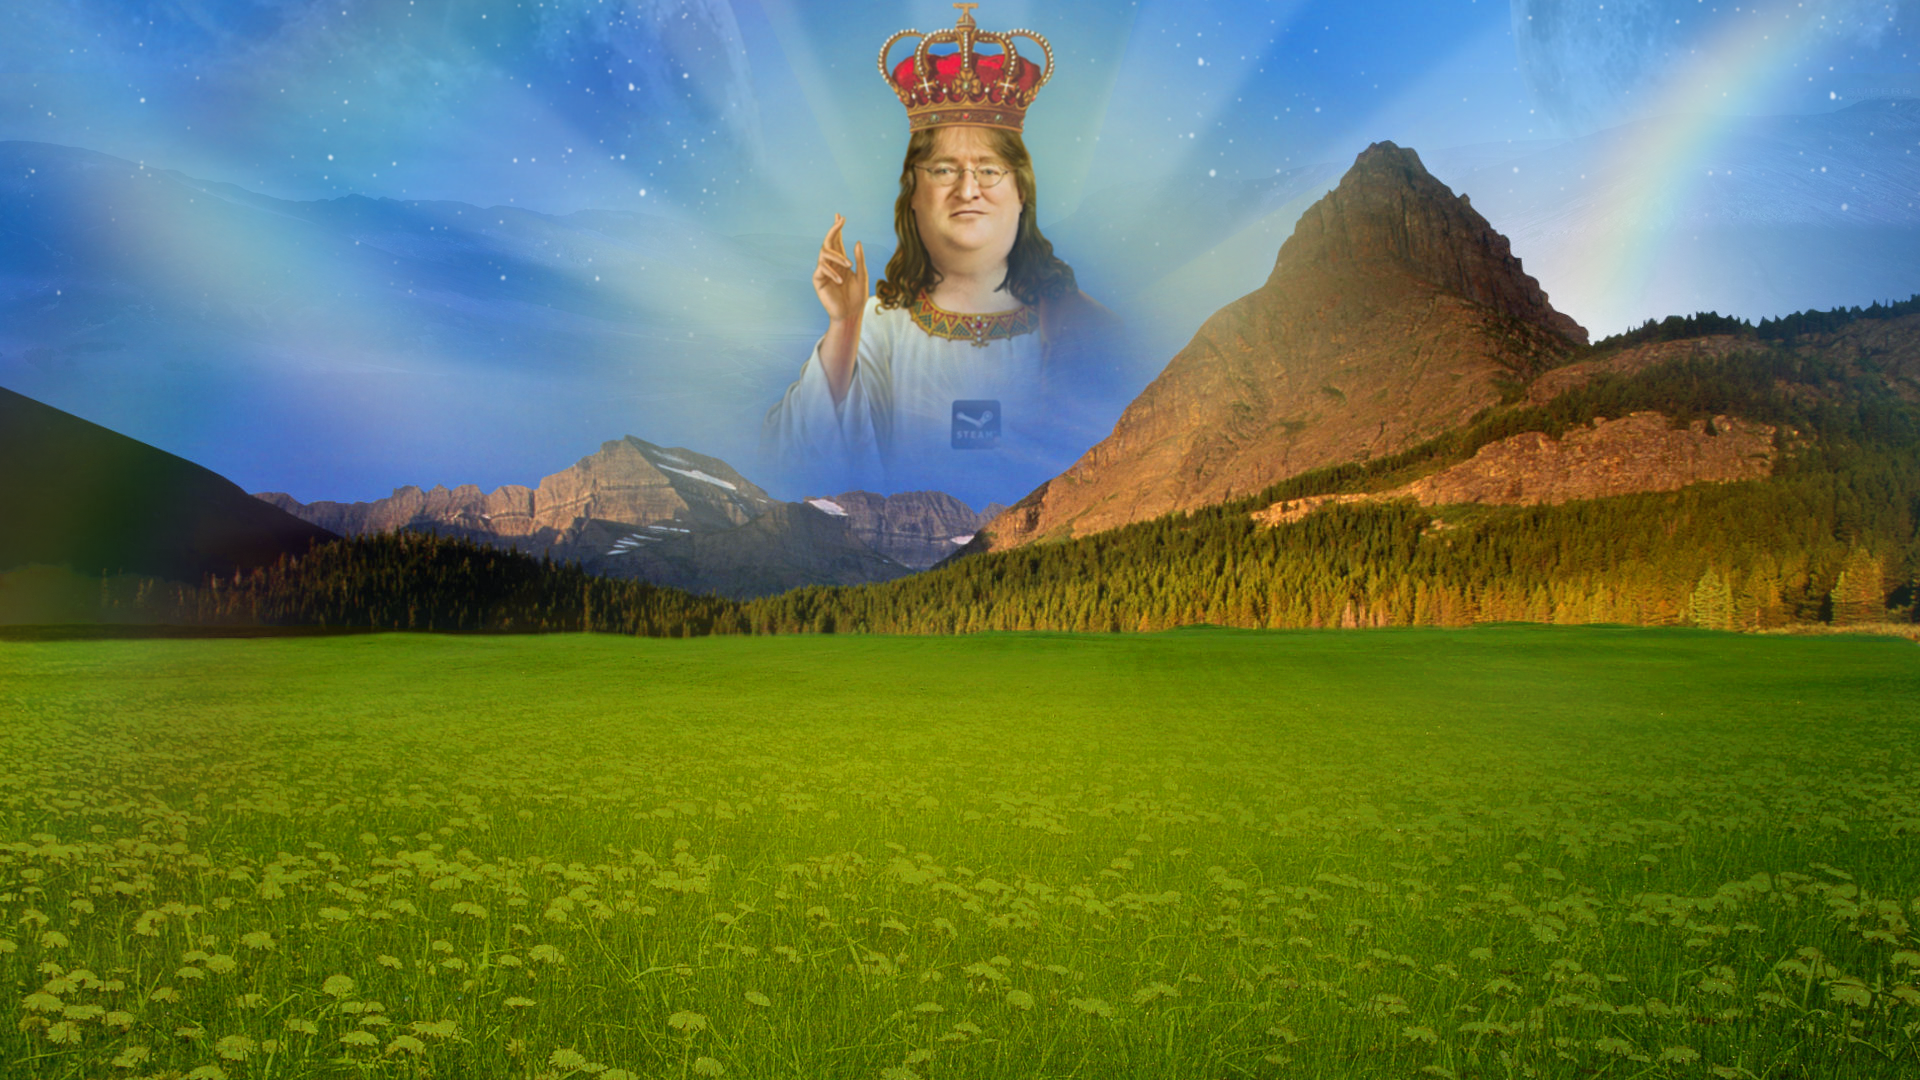 made a wallpaper in the honor of Lord GabeN my brethren [1920x1080